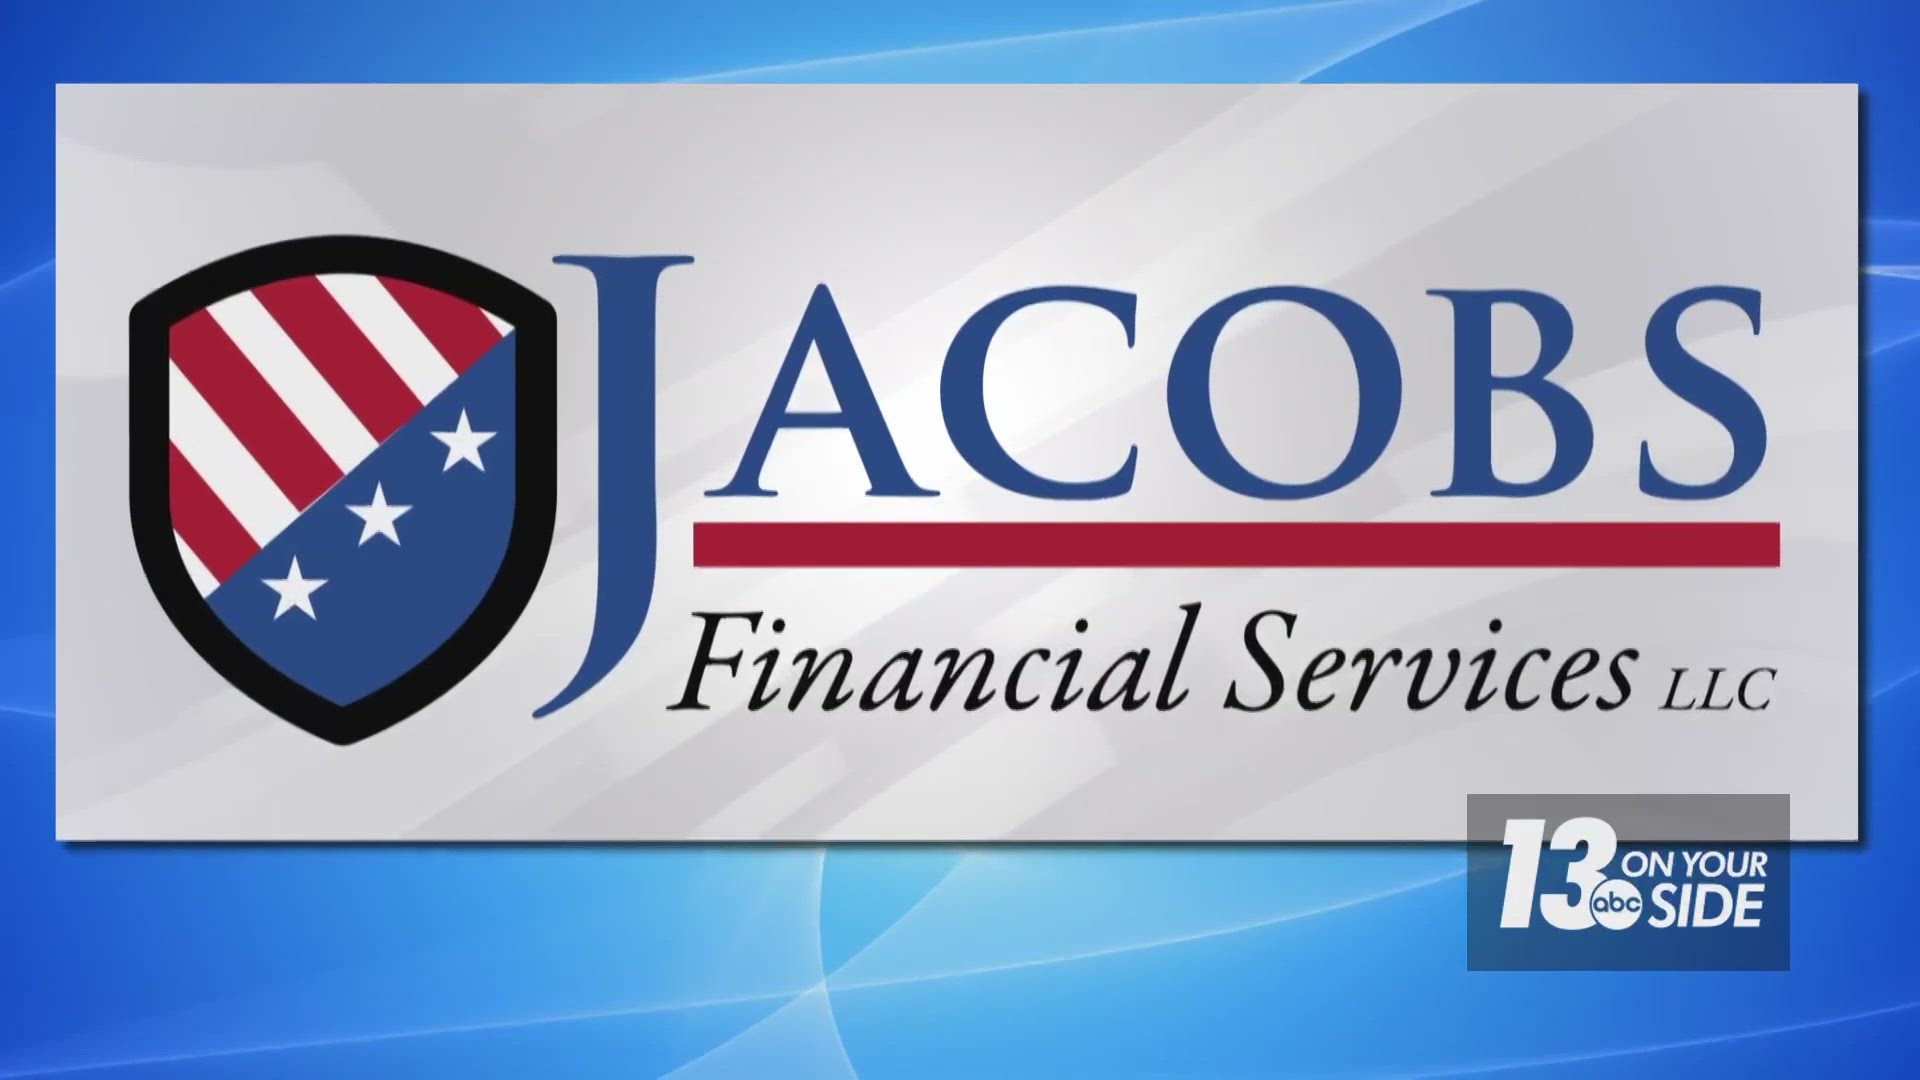 Tom Jacobs joined us from Jacobs Financial Services to talk about how to get that done.